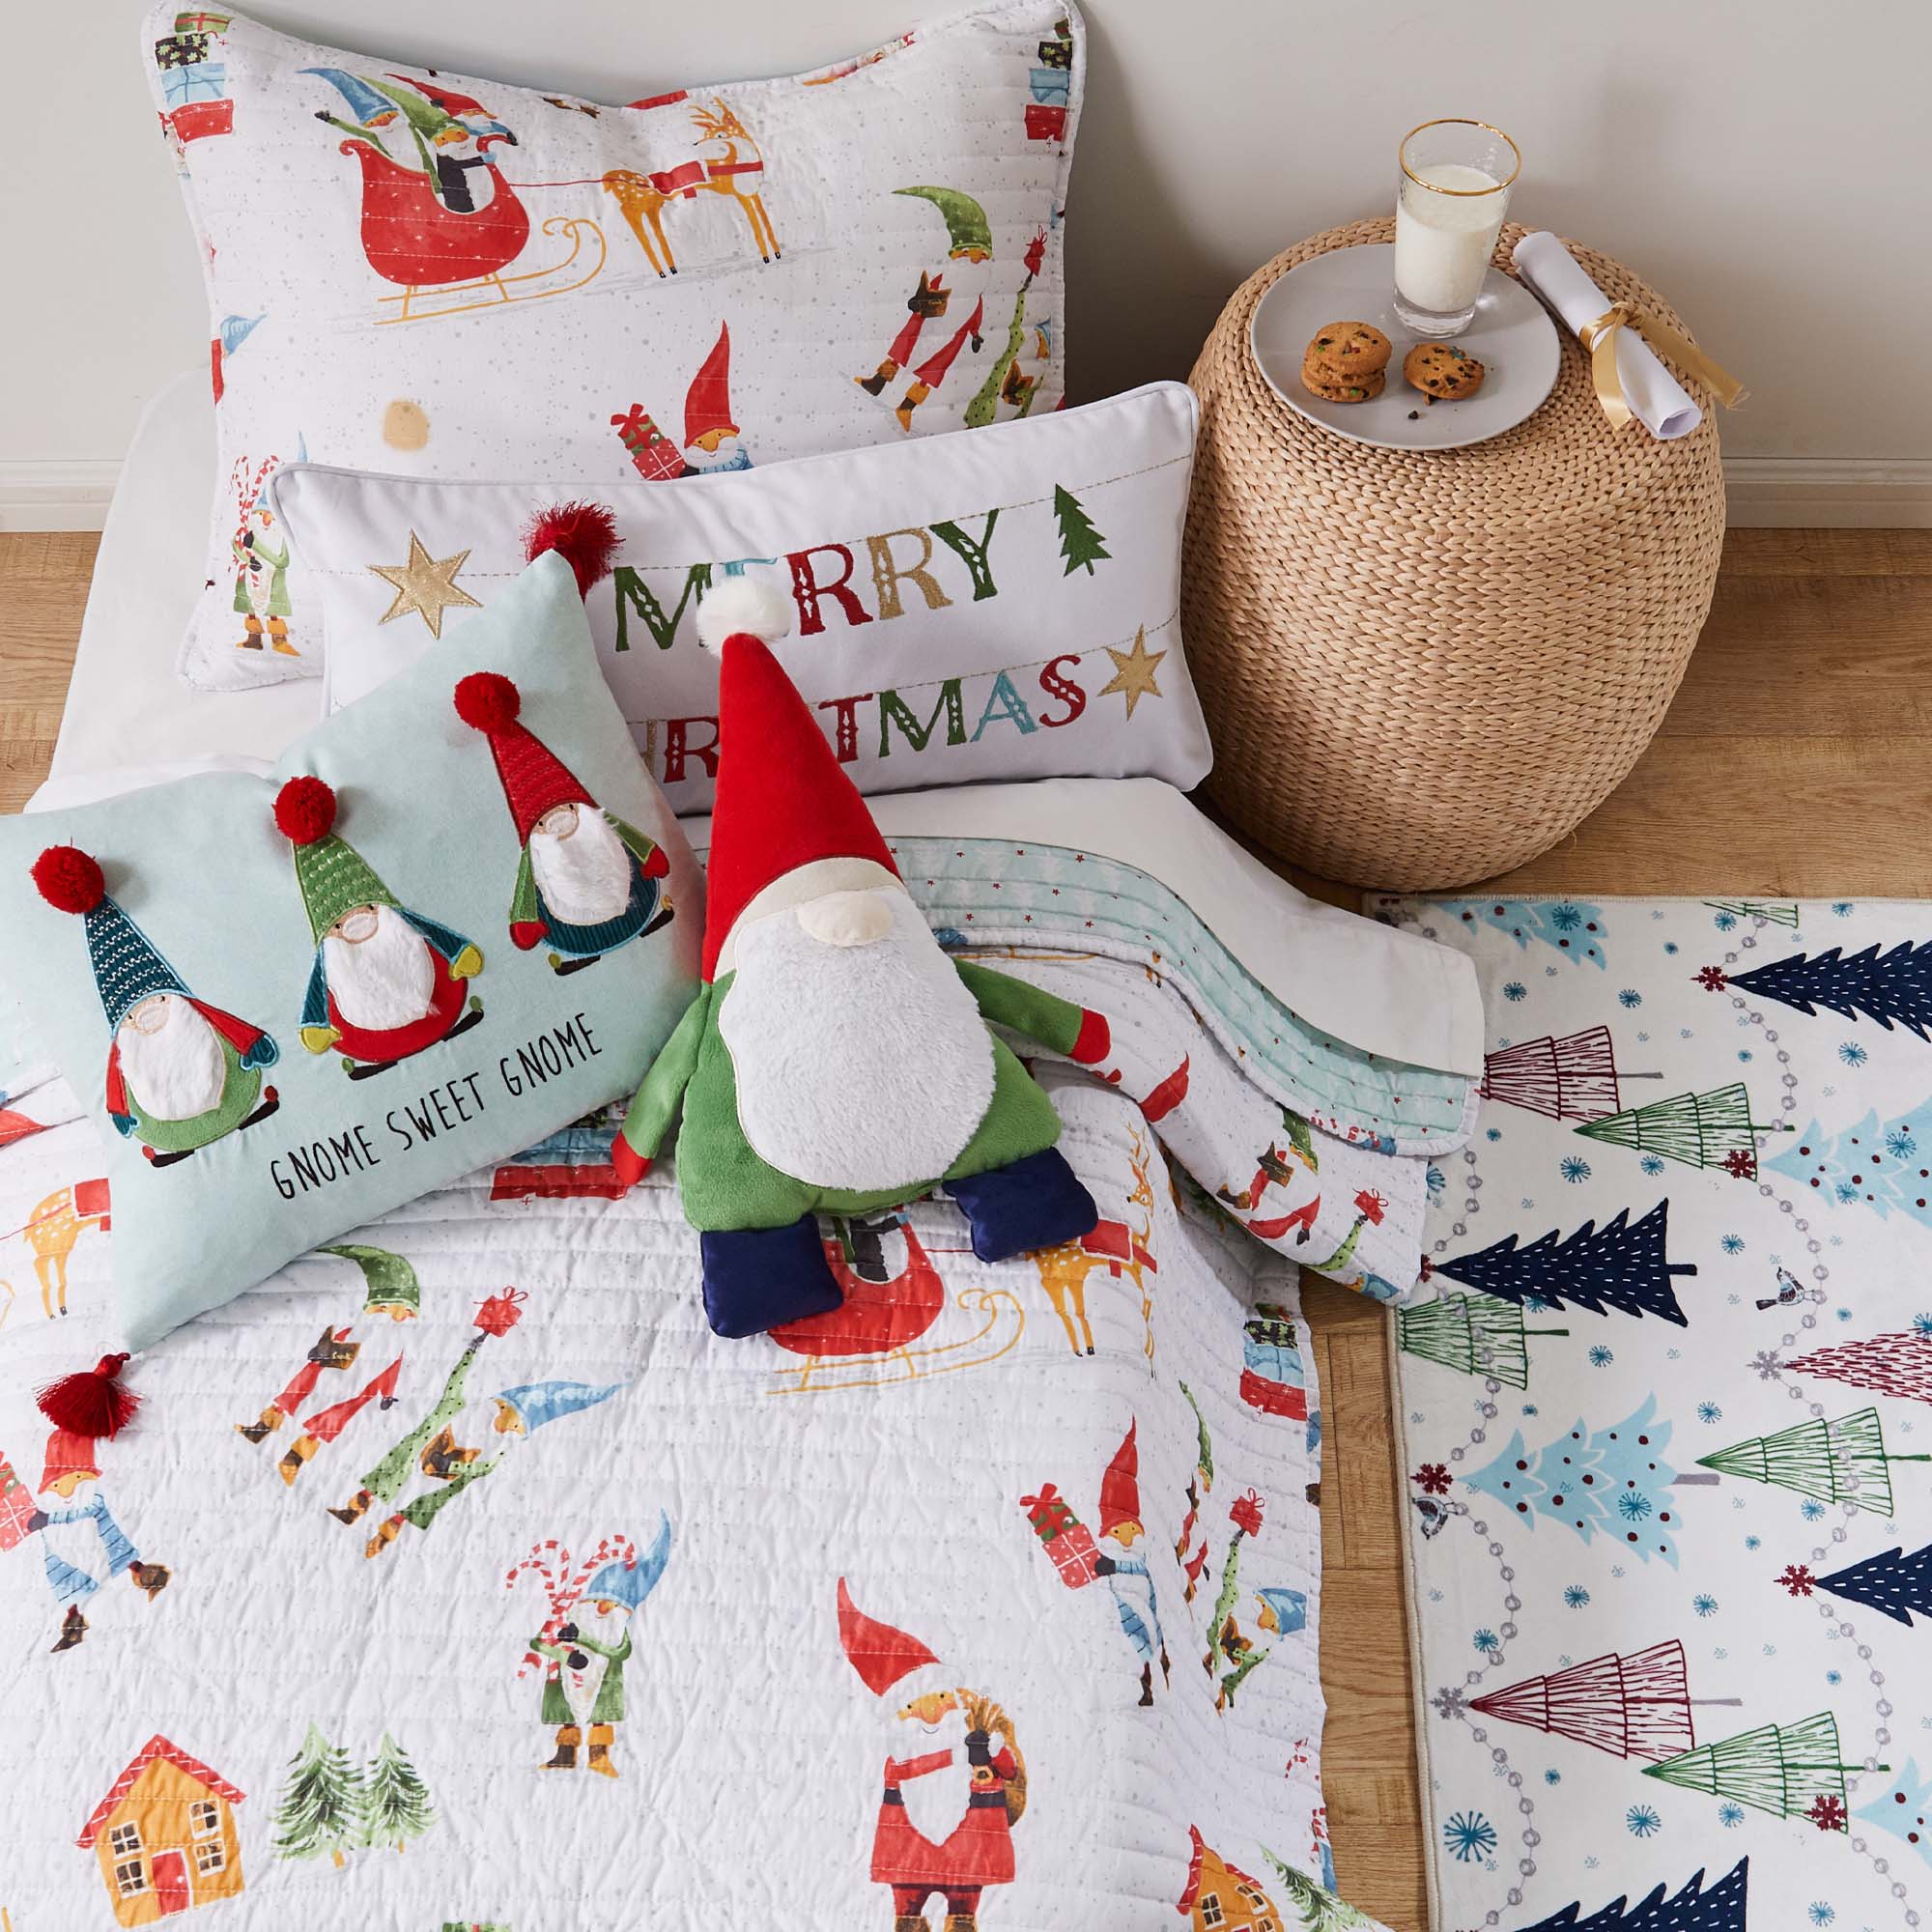 Gnome for the Holidays 3-Piece Toddler Bedding Set